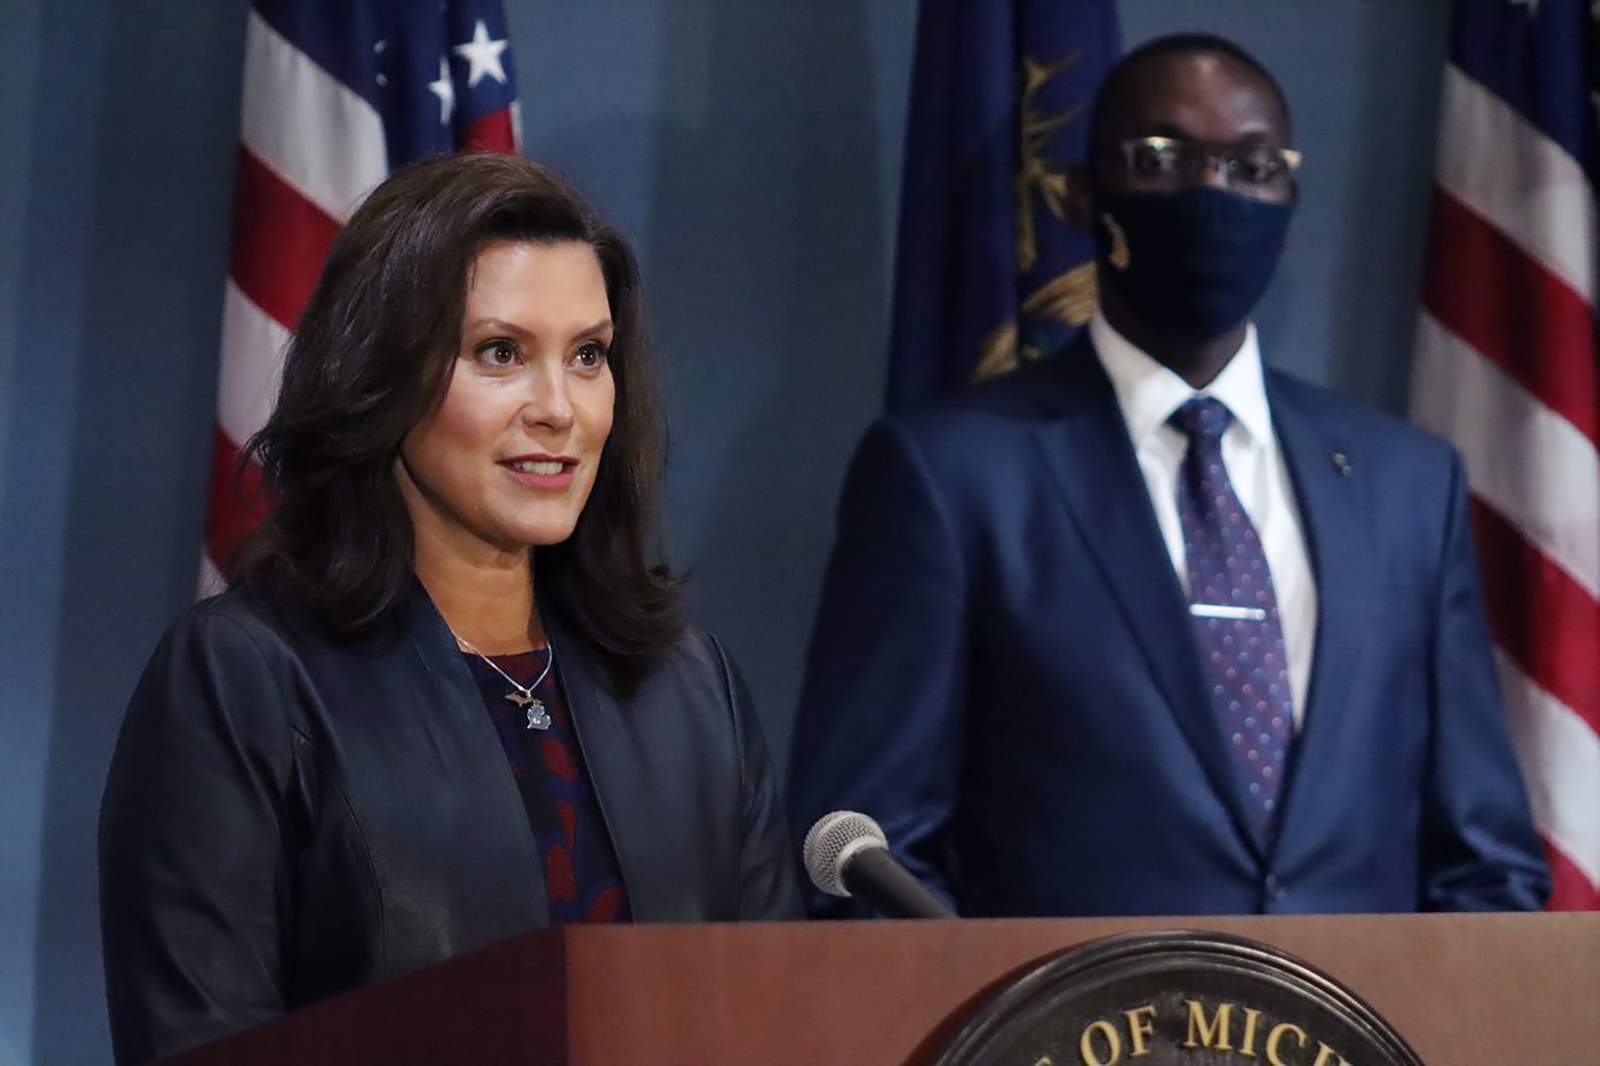 Michigan Gov. Whitmer: Loss of powers may put state back in ‘danger zone’